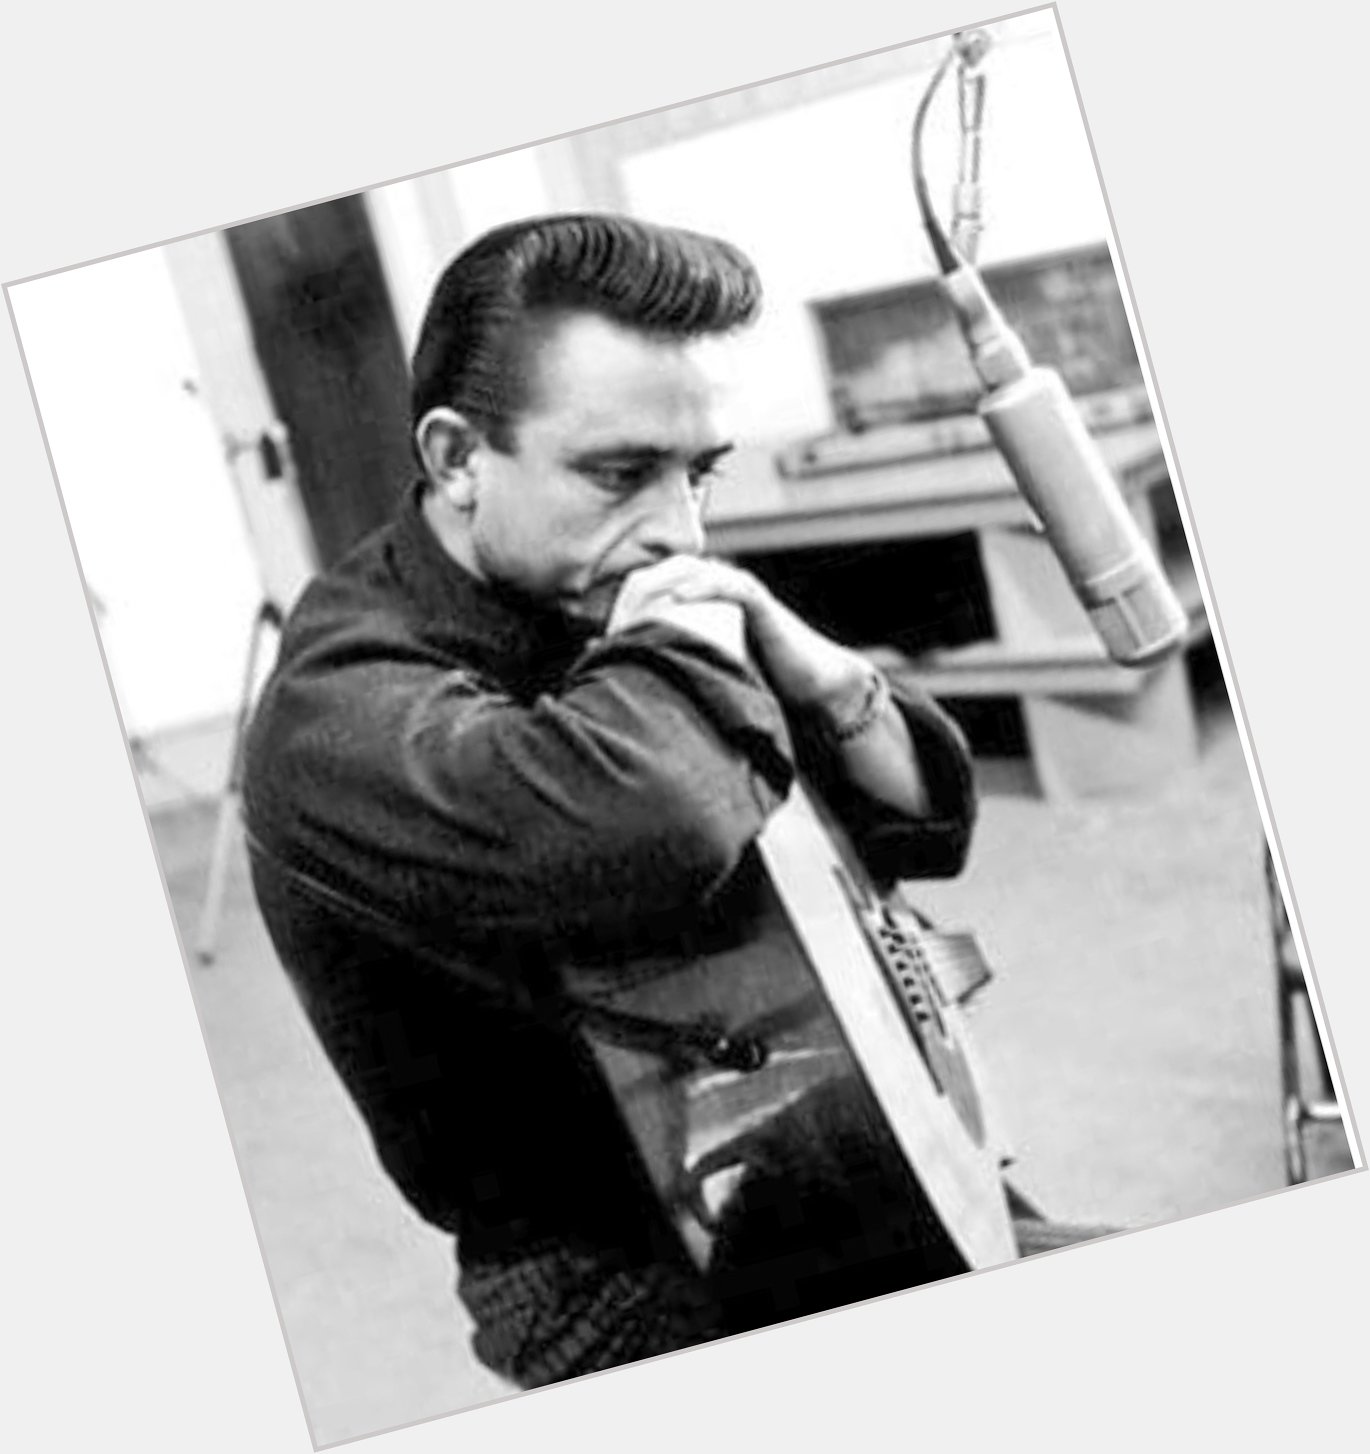 The Man in Black looking thoughtful in the studio... Happy birthday to one of the songwriting greats, Johnny Cash. 